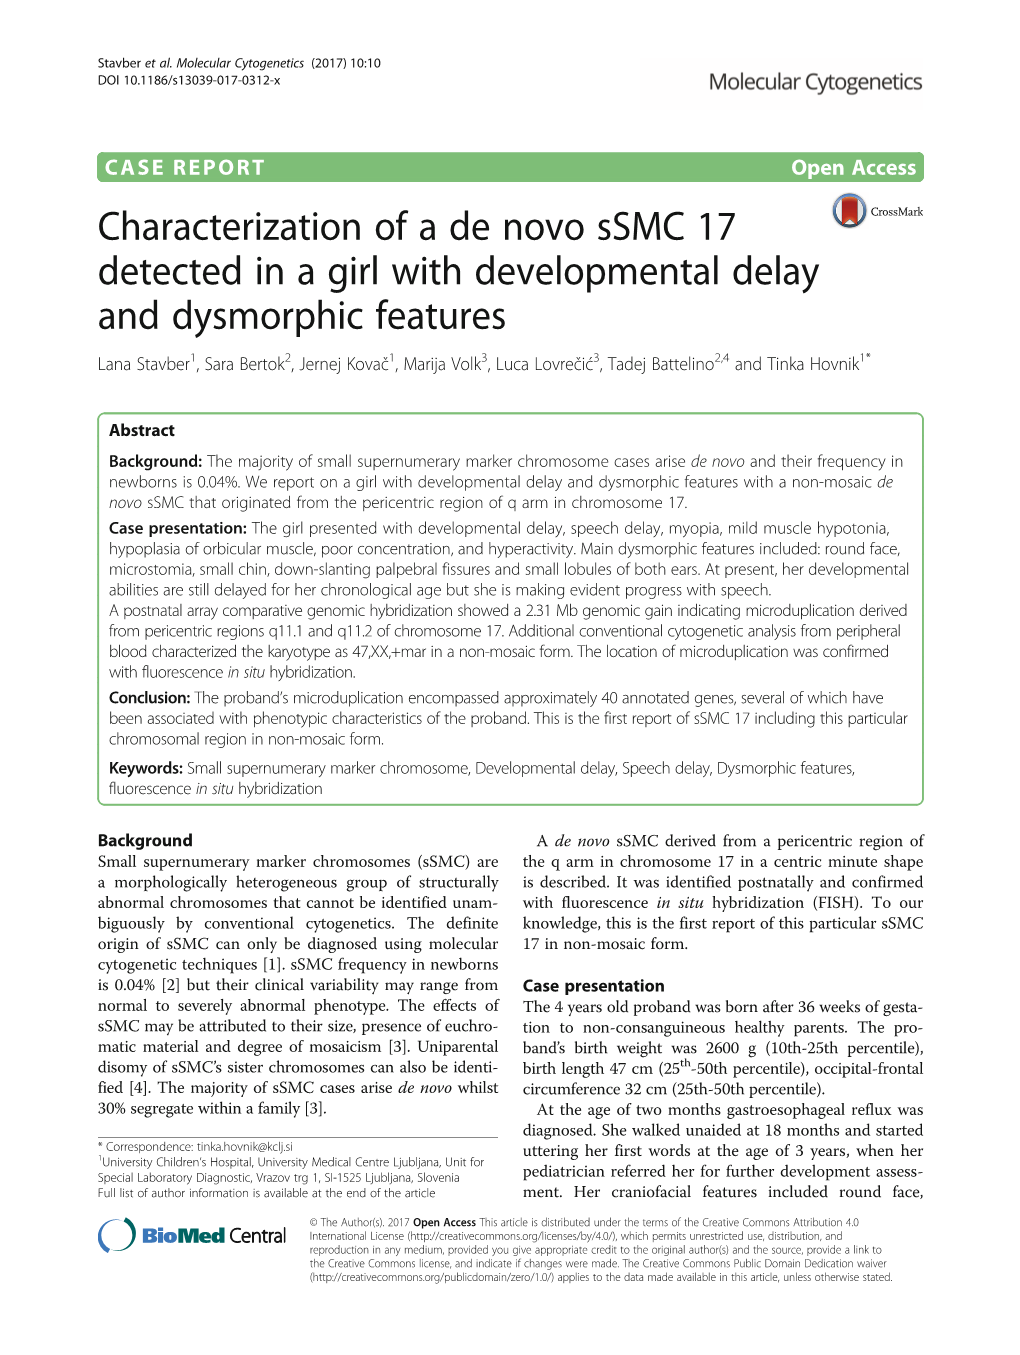 Characterization of a De Novo Ssmc 17 Detected in a Girl With